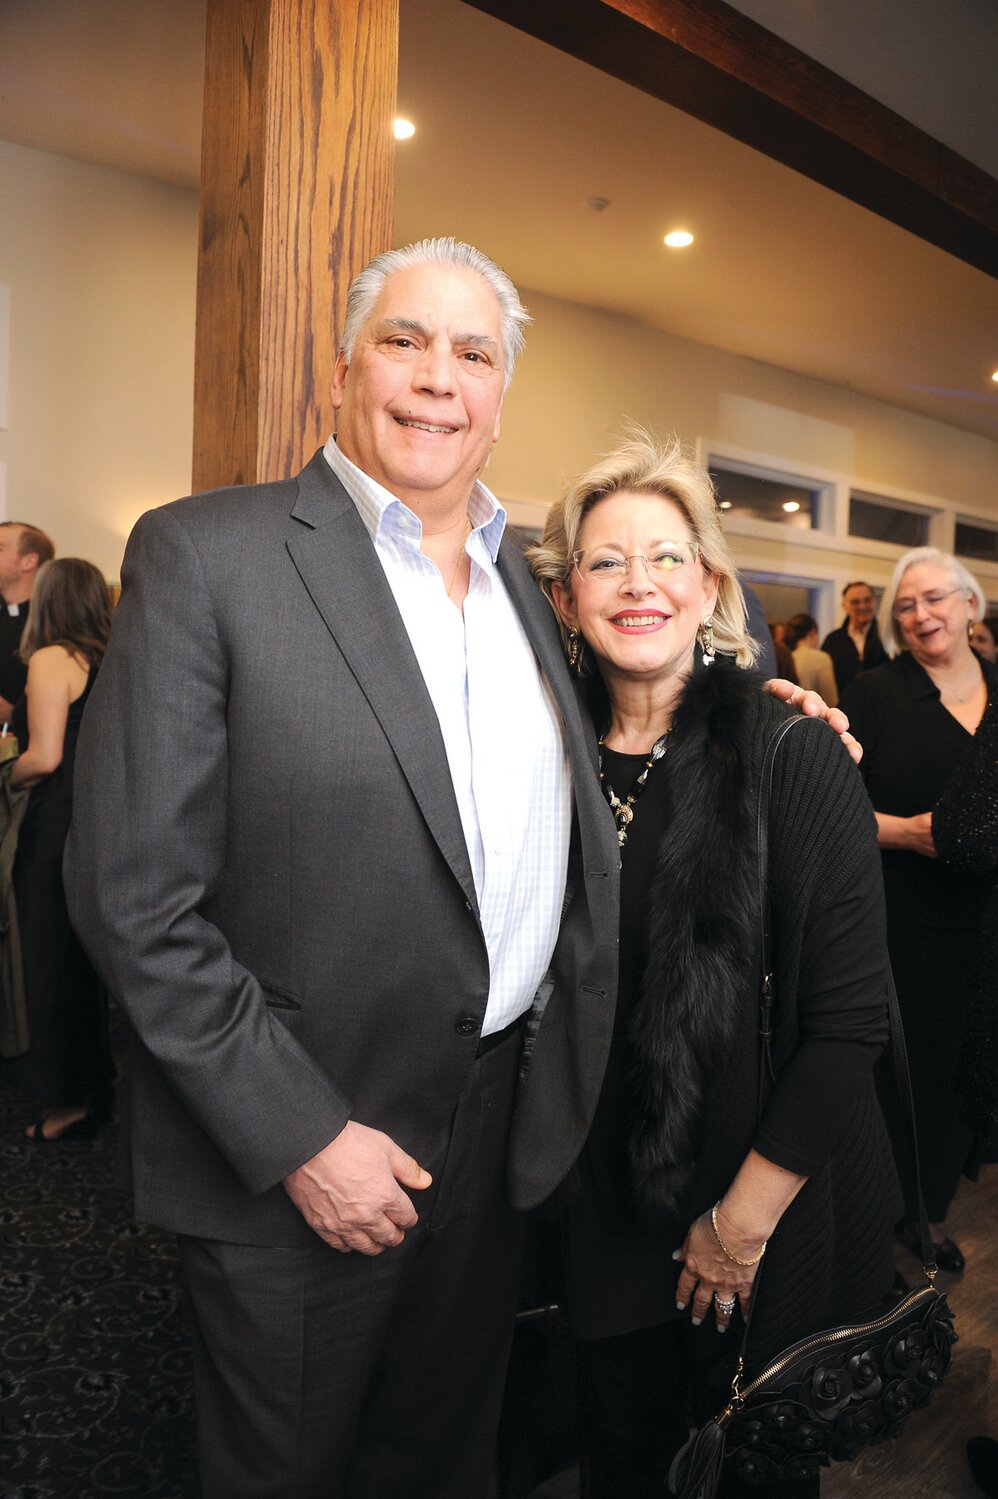 Felix Maietta and Theresa Fera, president and CEO, Central Bucks Chamber of Commerce.